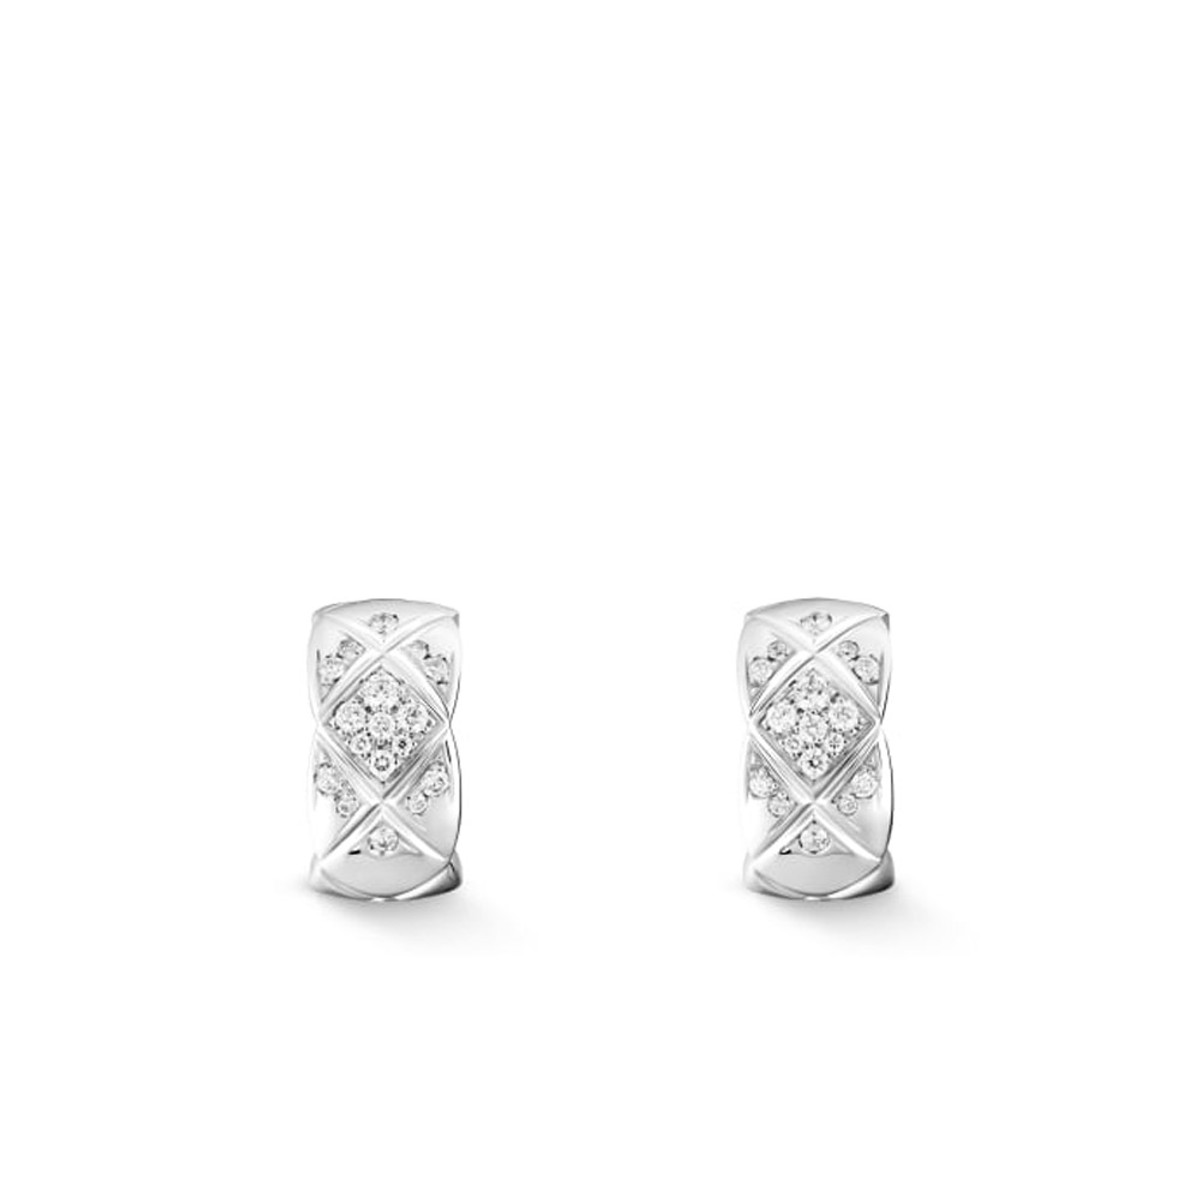 CHANEL COCO CRUSH EARRINGS-25952 - Hyde Park Jewelers